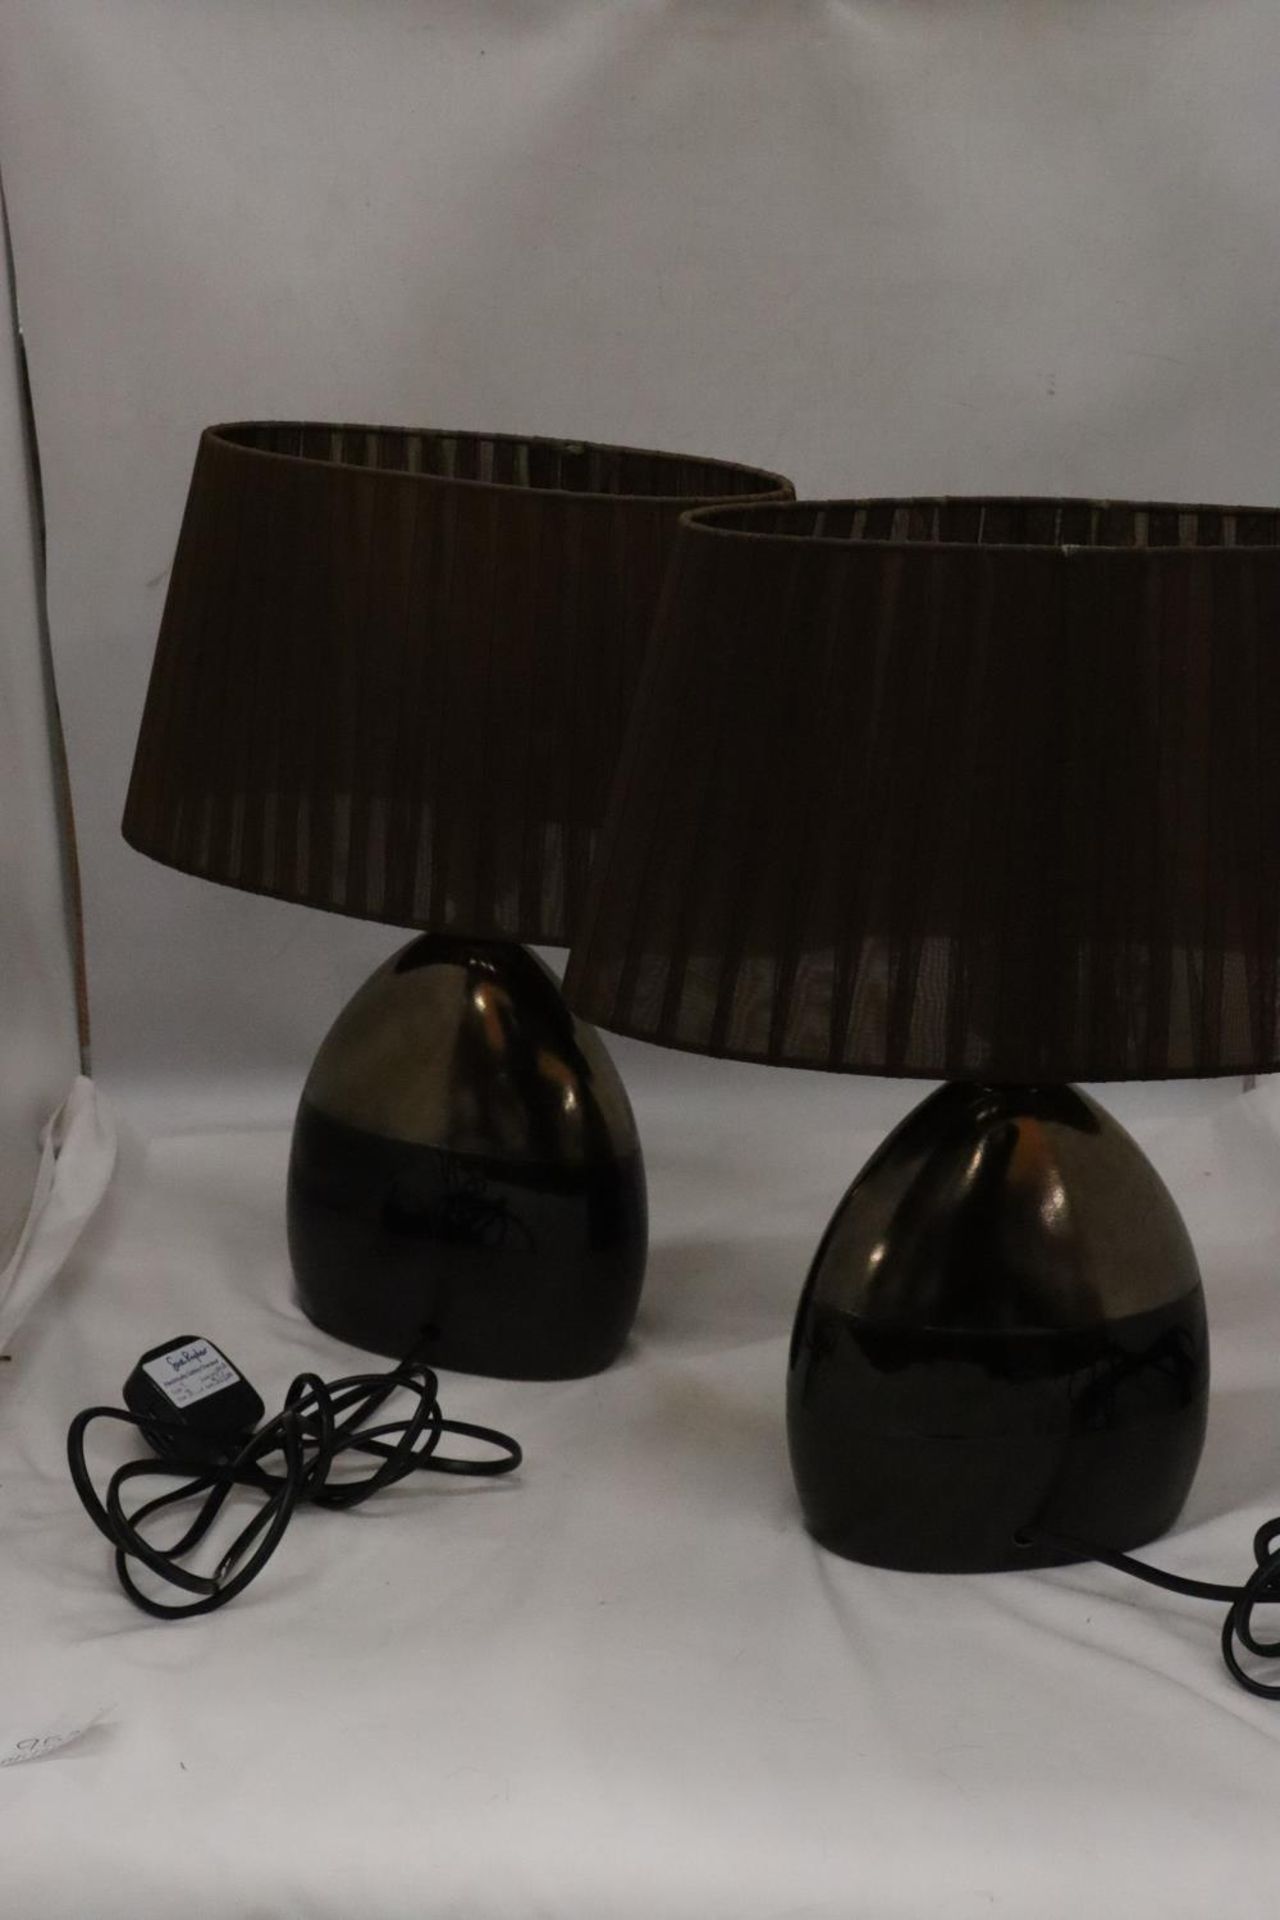 A PAIR OF MODERN TABLE LAMPS WITH SHADES - Image 4 of 4